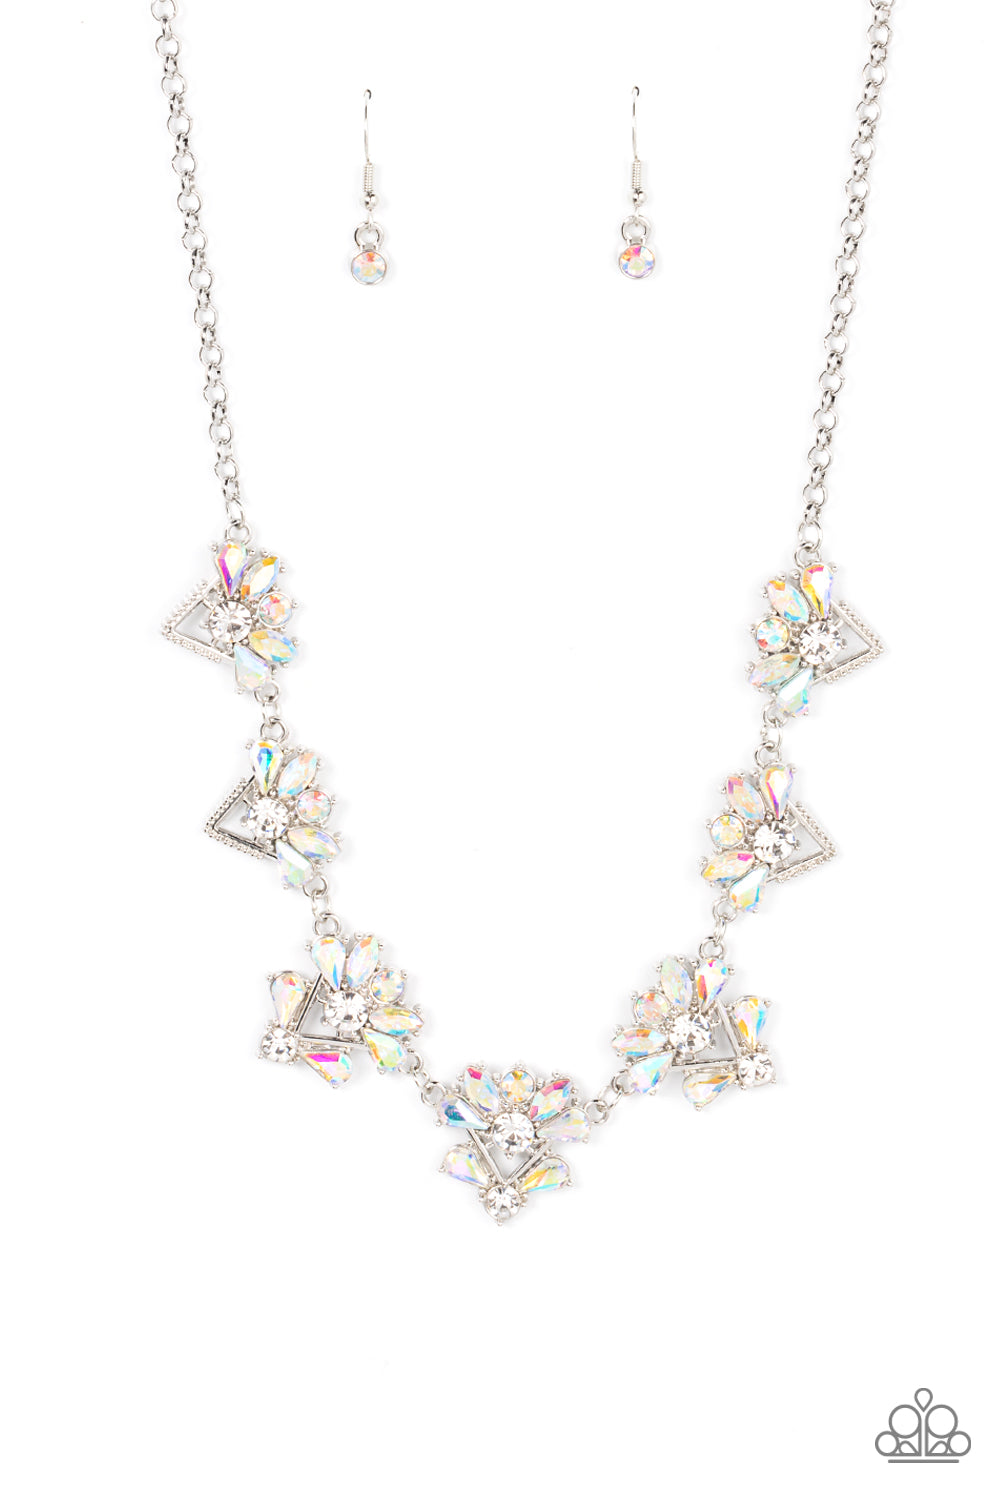 Extragalactic Extravagance Multi Necklace - Paparazzi Accessories  Featuring a stellar radiance, clusters of teardrop and marquise cut iridescent rhinestones fan out from white rhinestone centers along the tops of studded and pronged triangular frames. The centermost frames feature embellished bottoms, adding an extra splash of cosmic iridescence as the celestial frames link into an out-of-this-world sparkle below the collar. Features an adjustable clasp closure. Includes one pair of matching earrings.